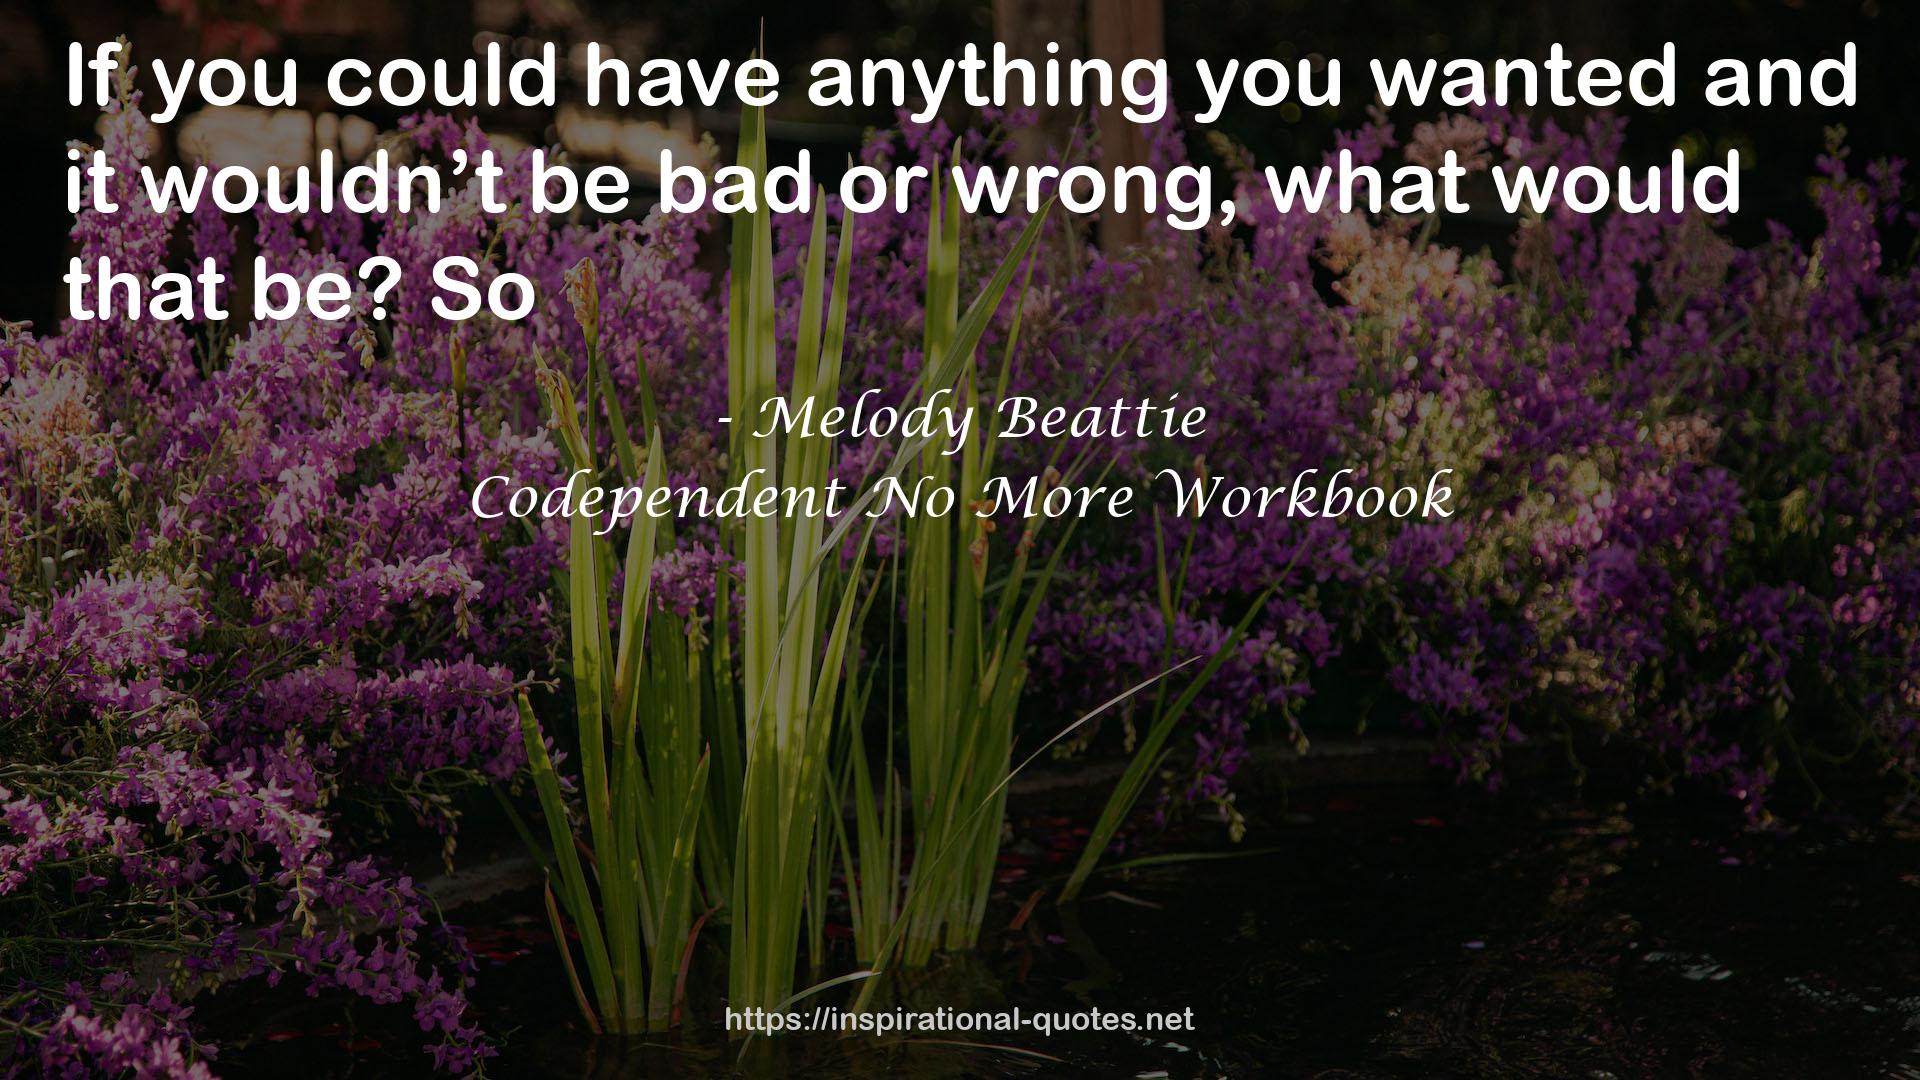 Codependent No More Workbook QUOTES